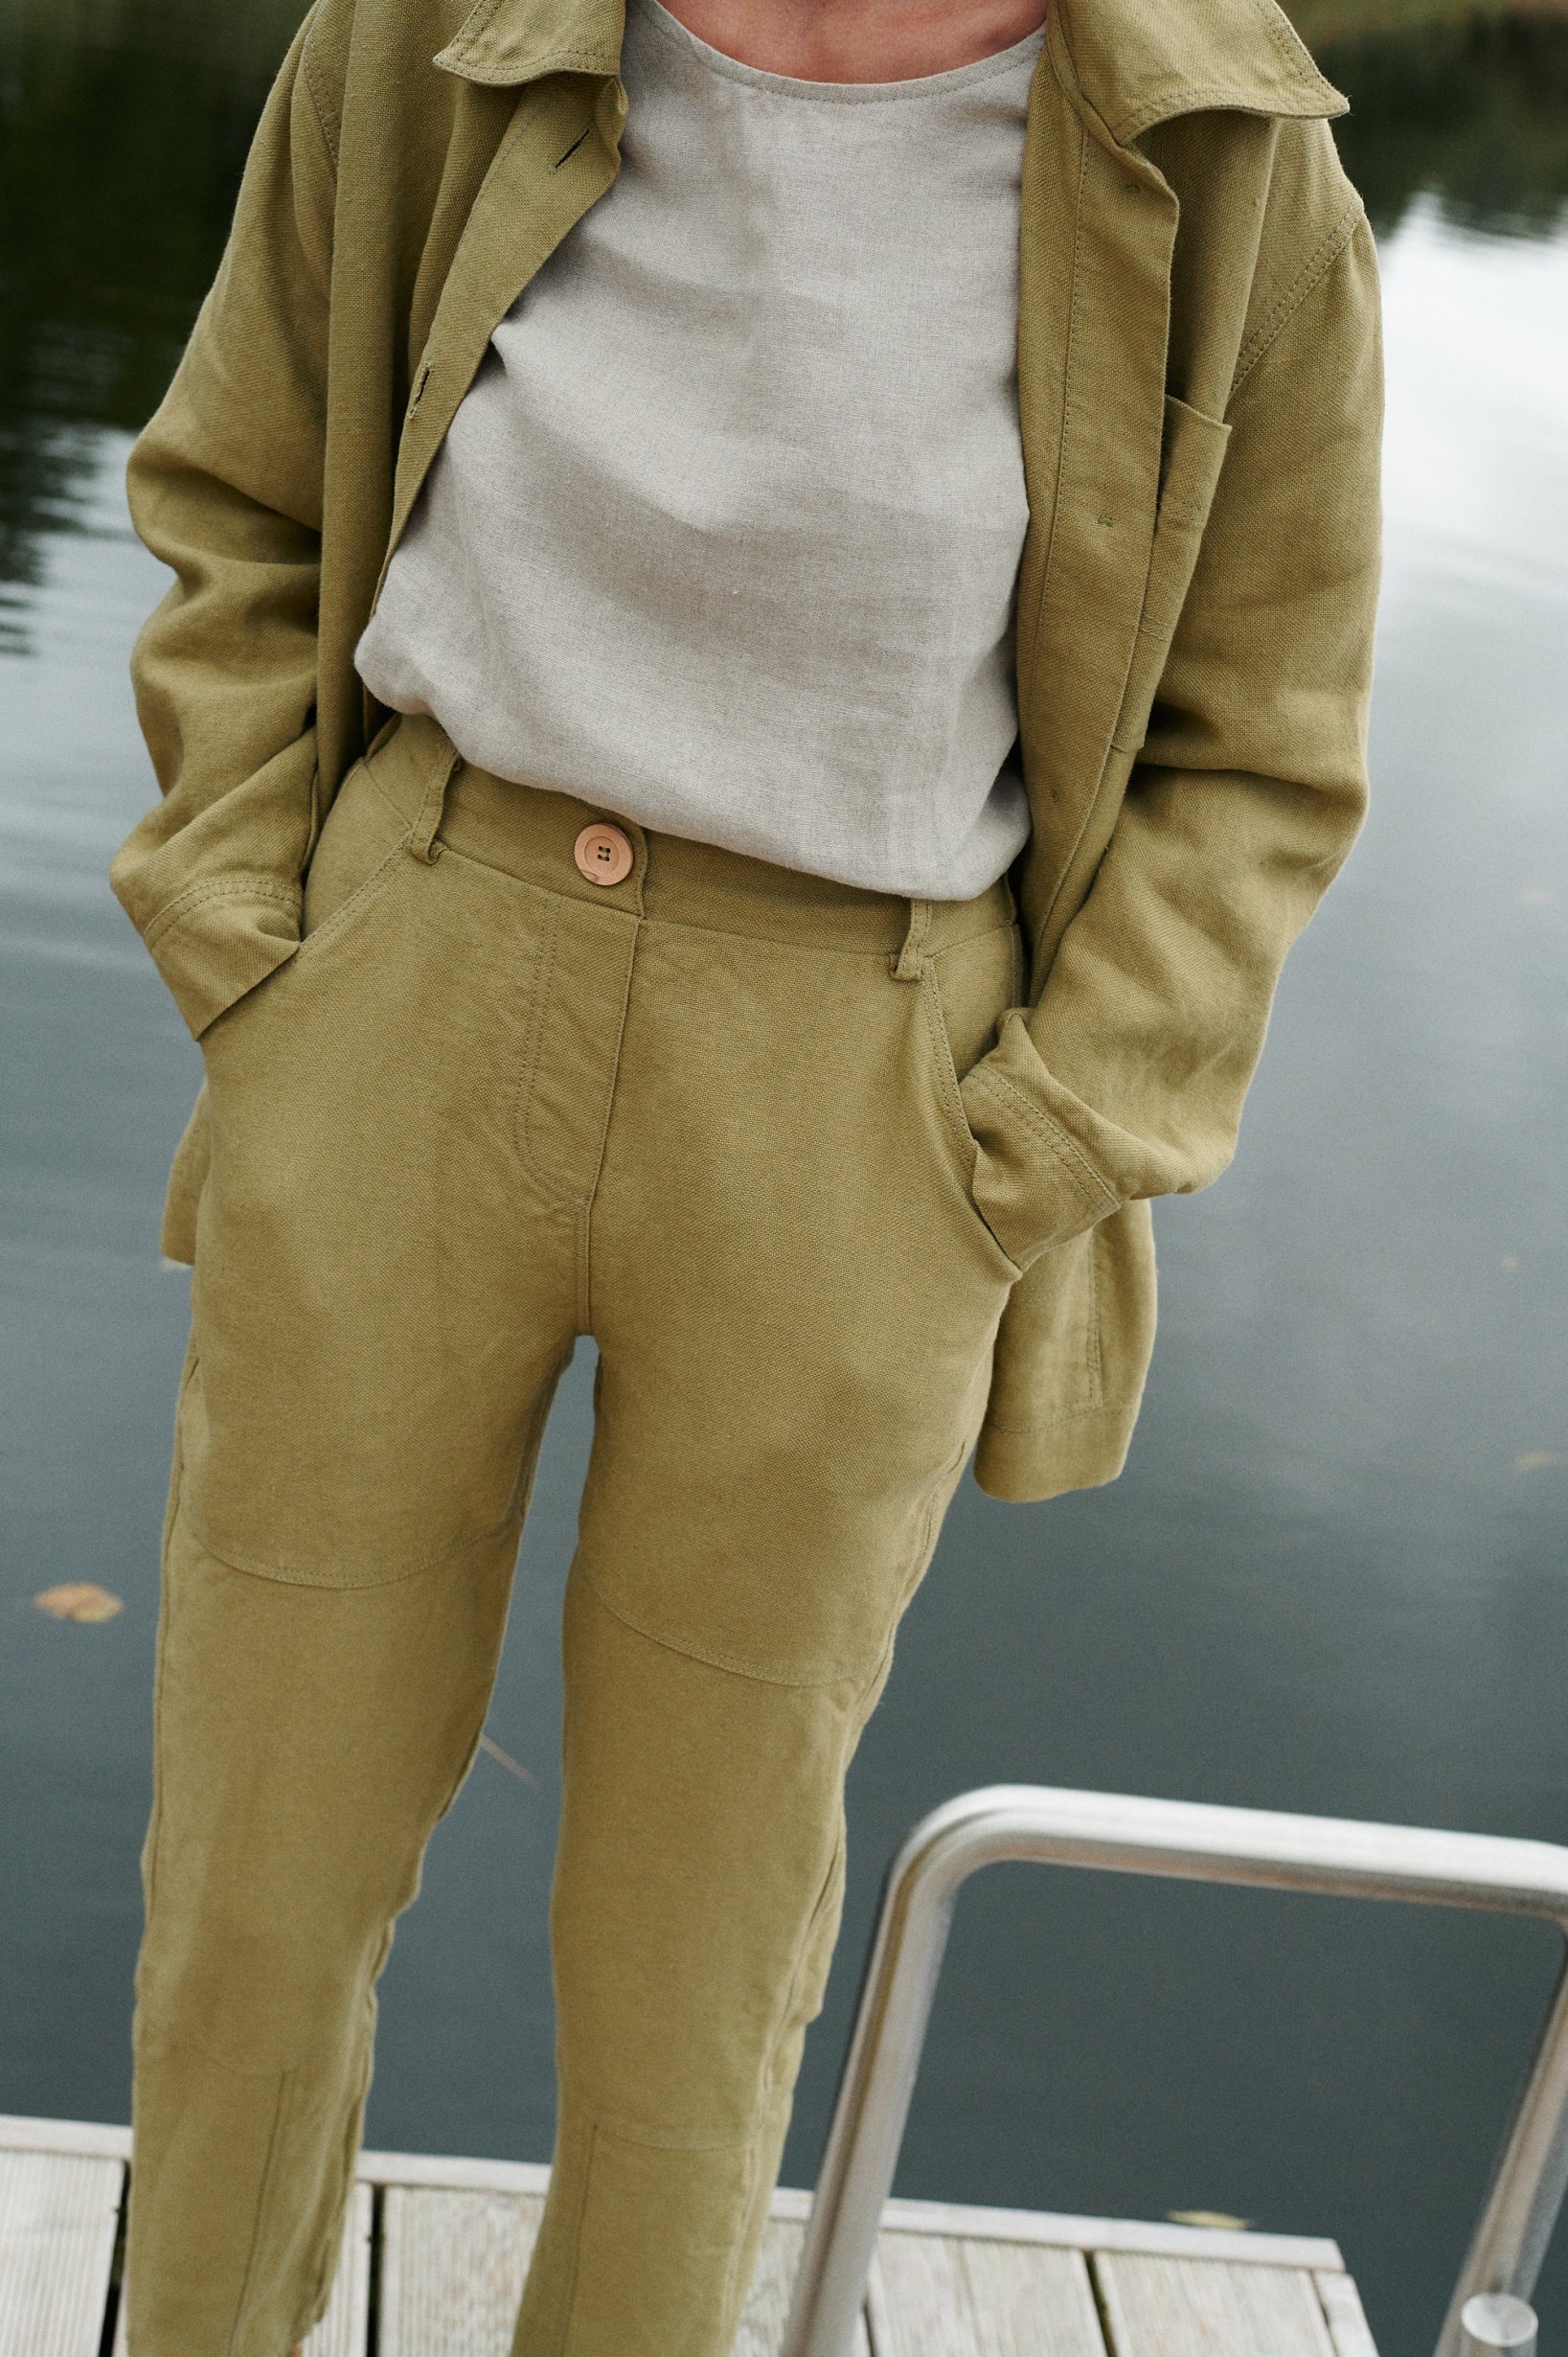 High-waisted utility trousers with a tucked in top